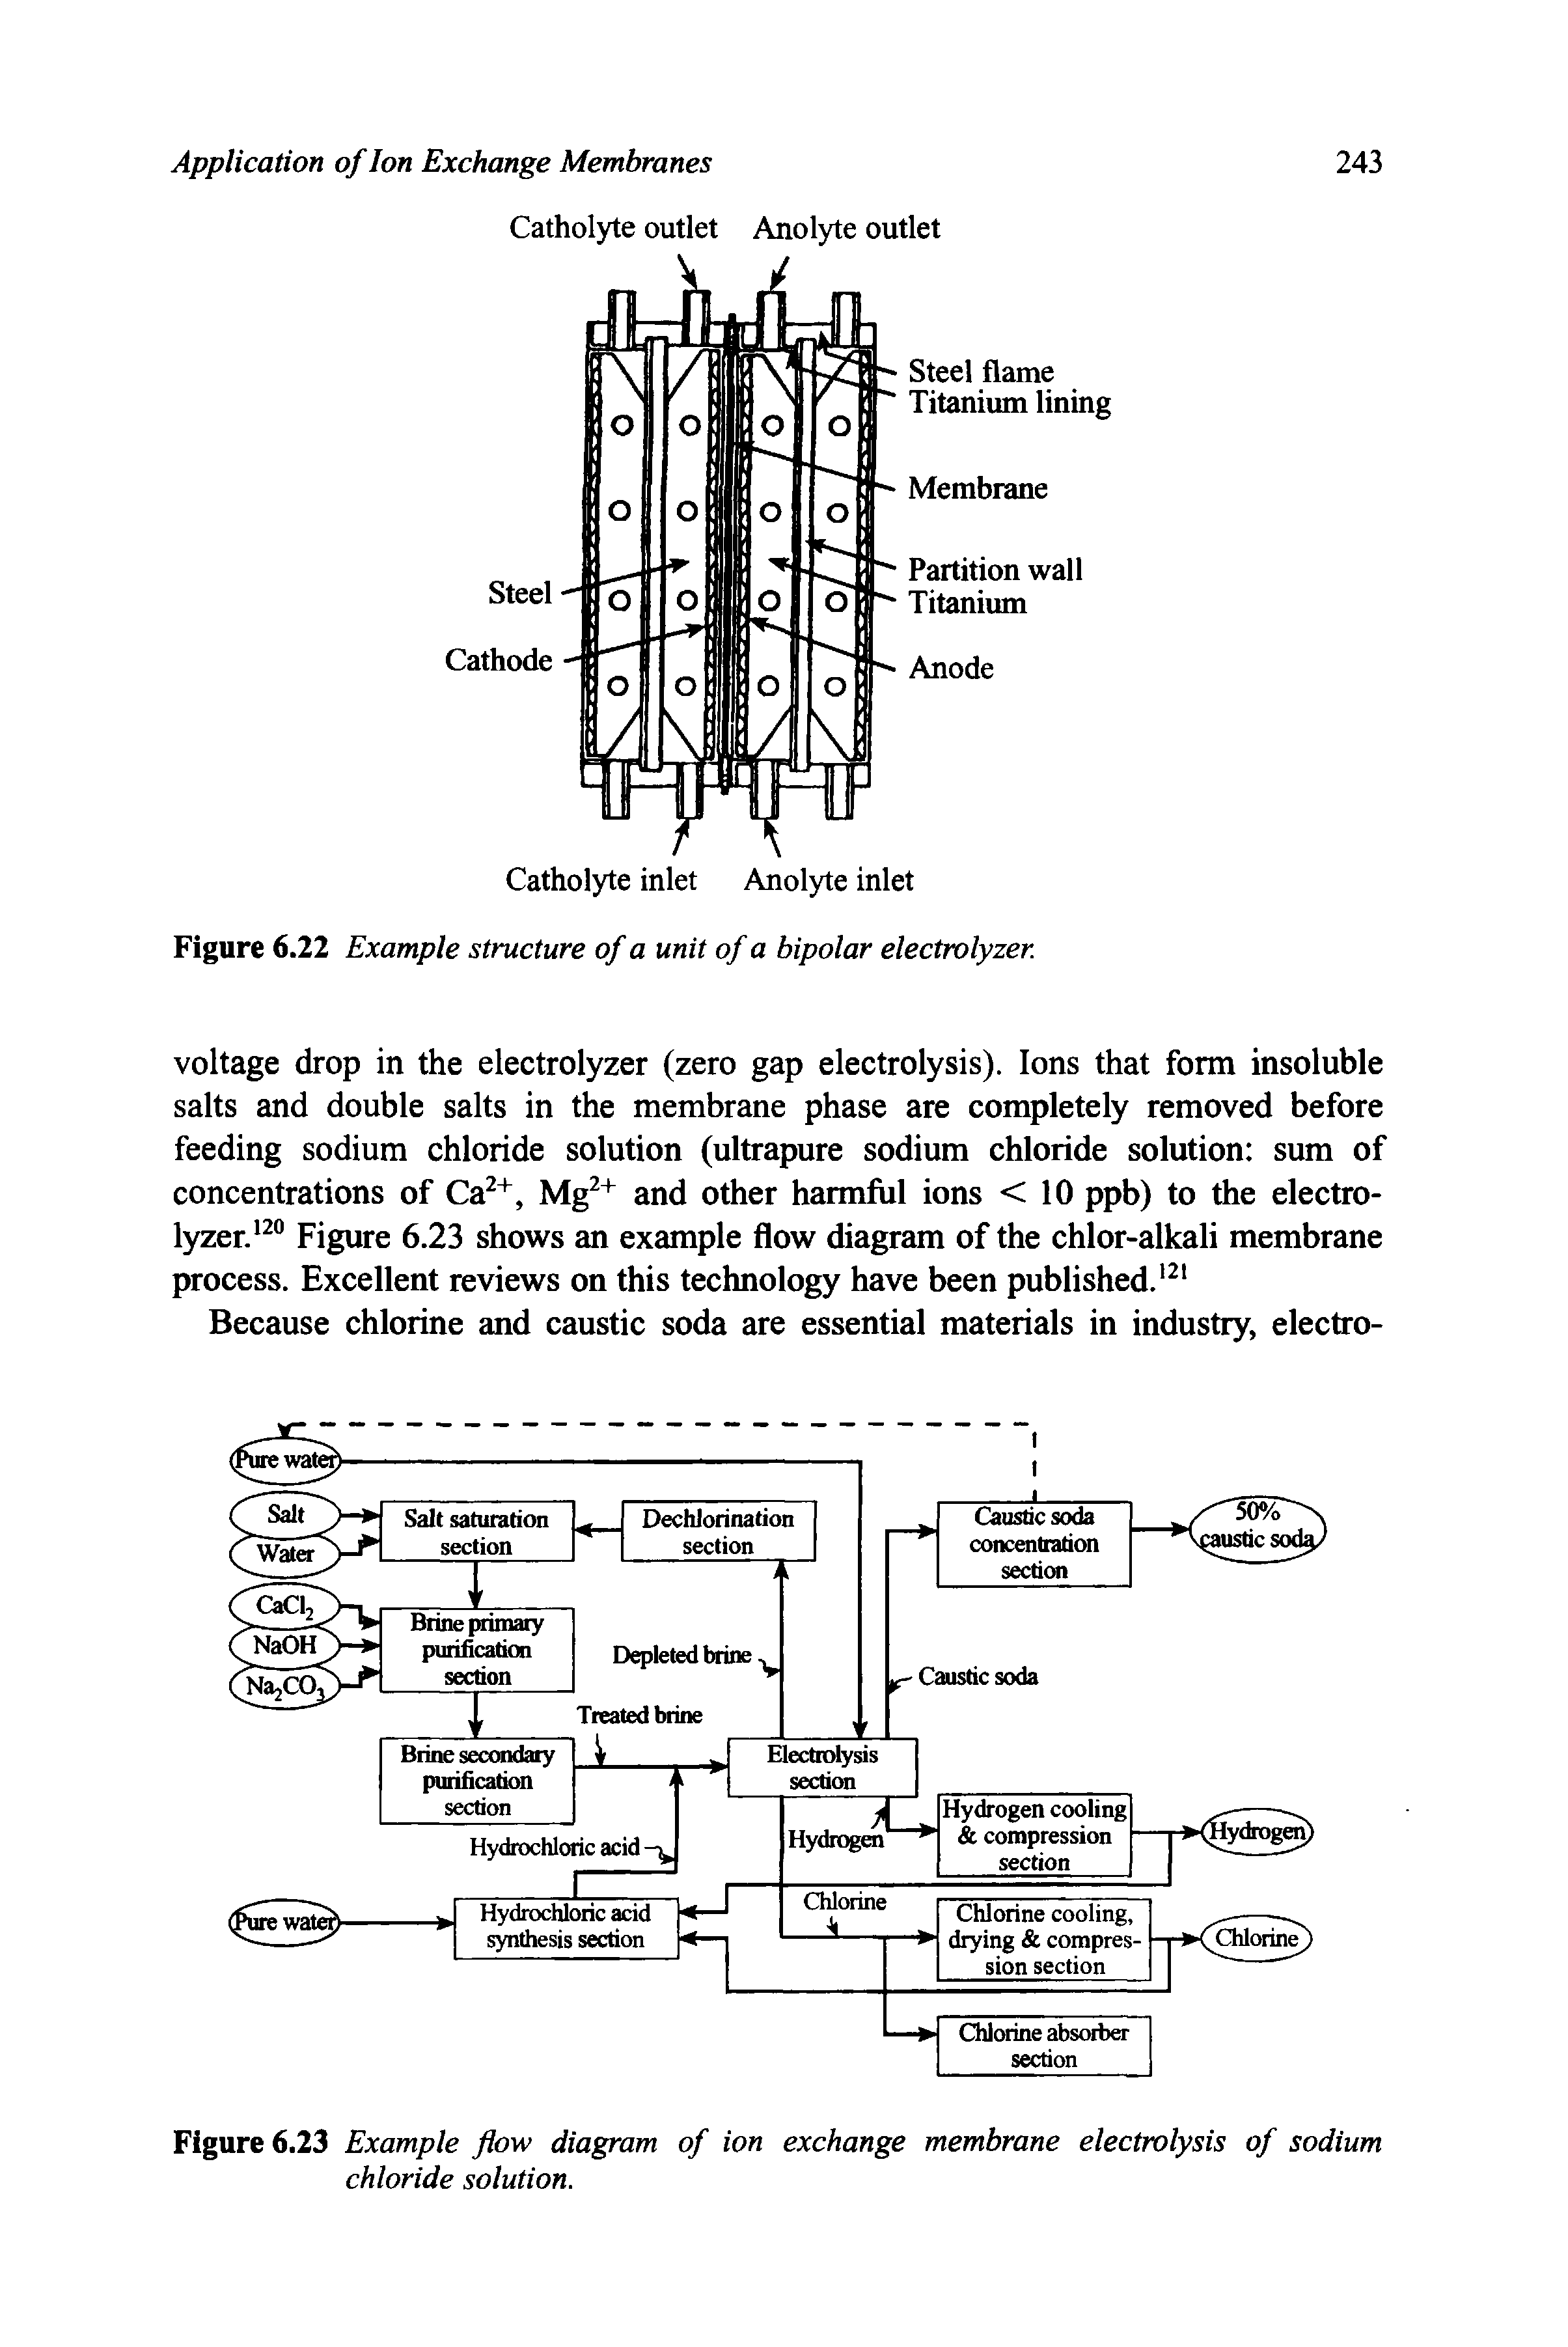 Figure 6.22 Example structure of a unit of a bipolar electrolyzer.